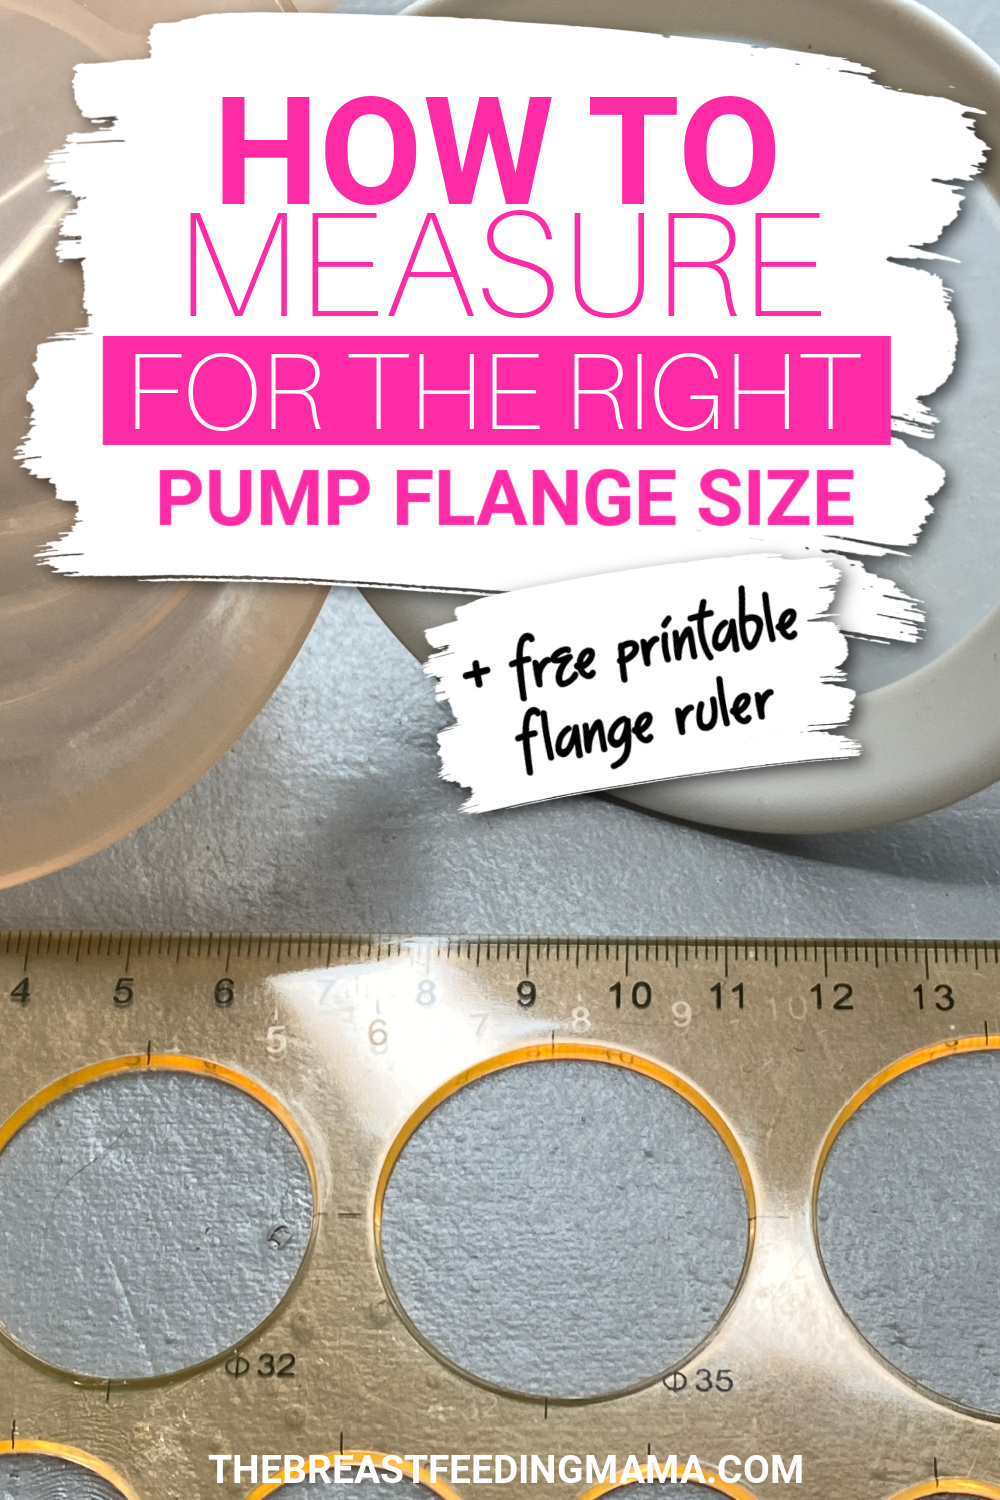 HOW TO MEASURE FLANGE SIZE